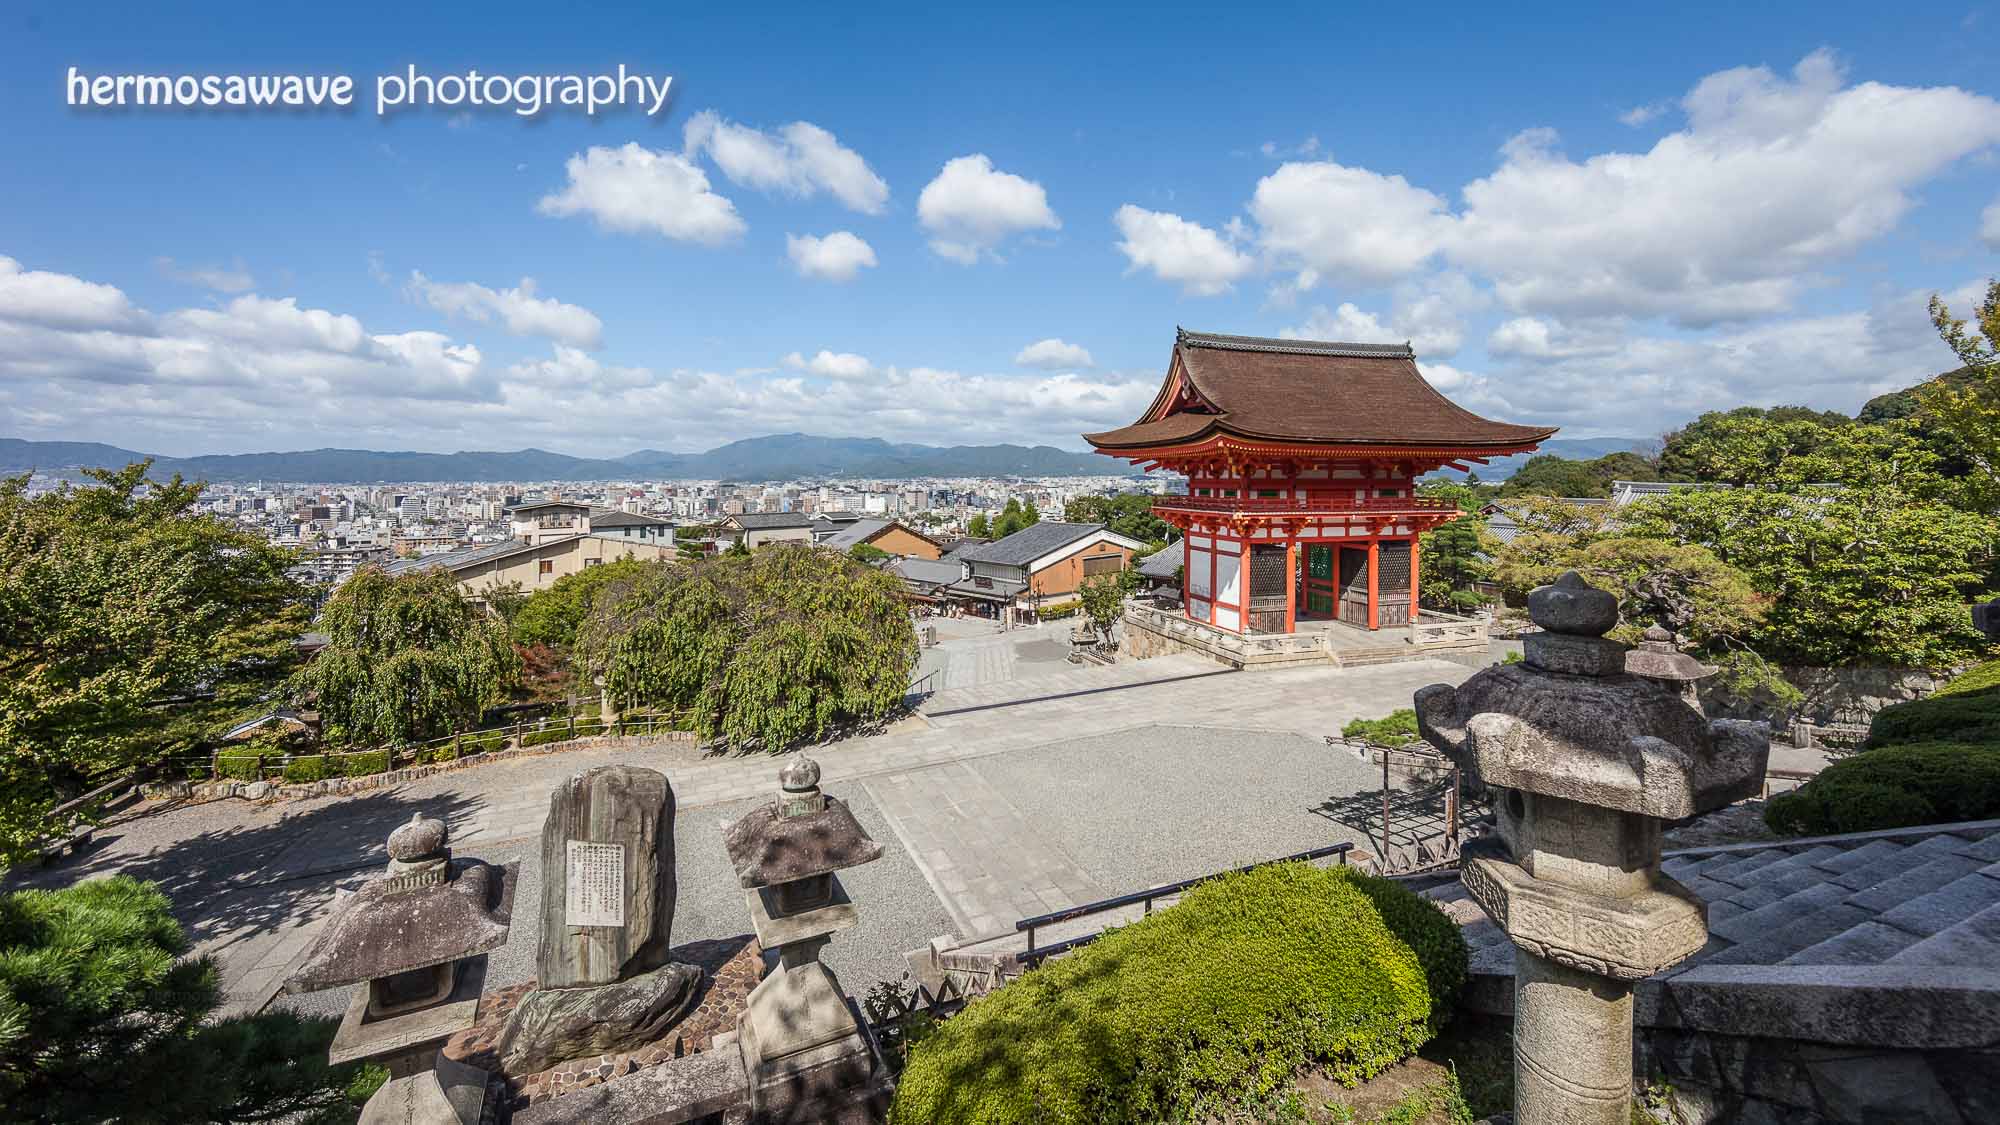 Looking out over Kyoto from Kiyomizudera